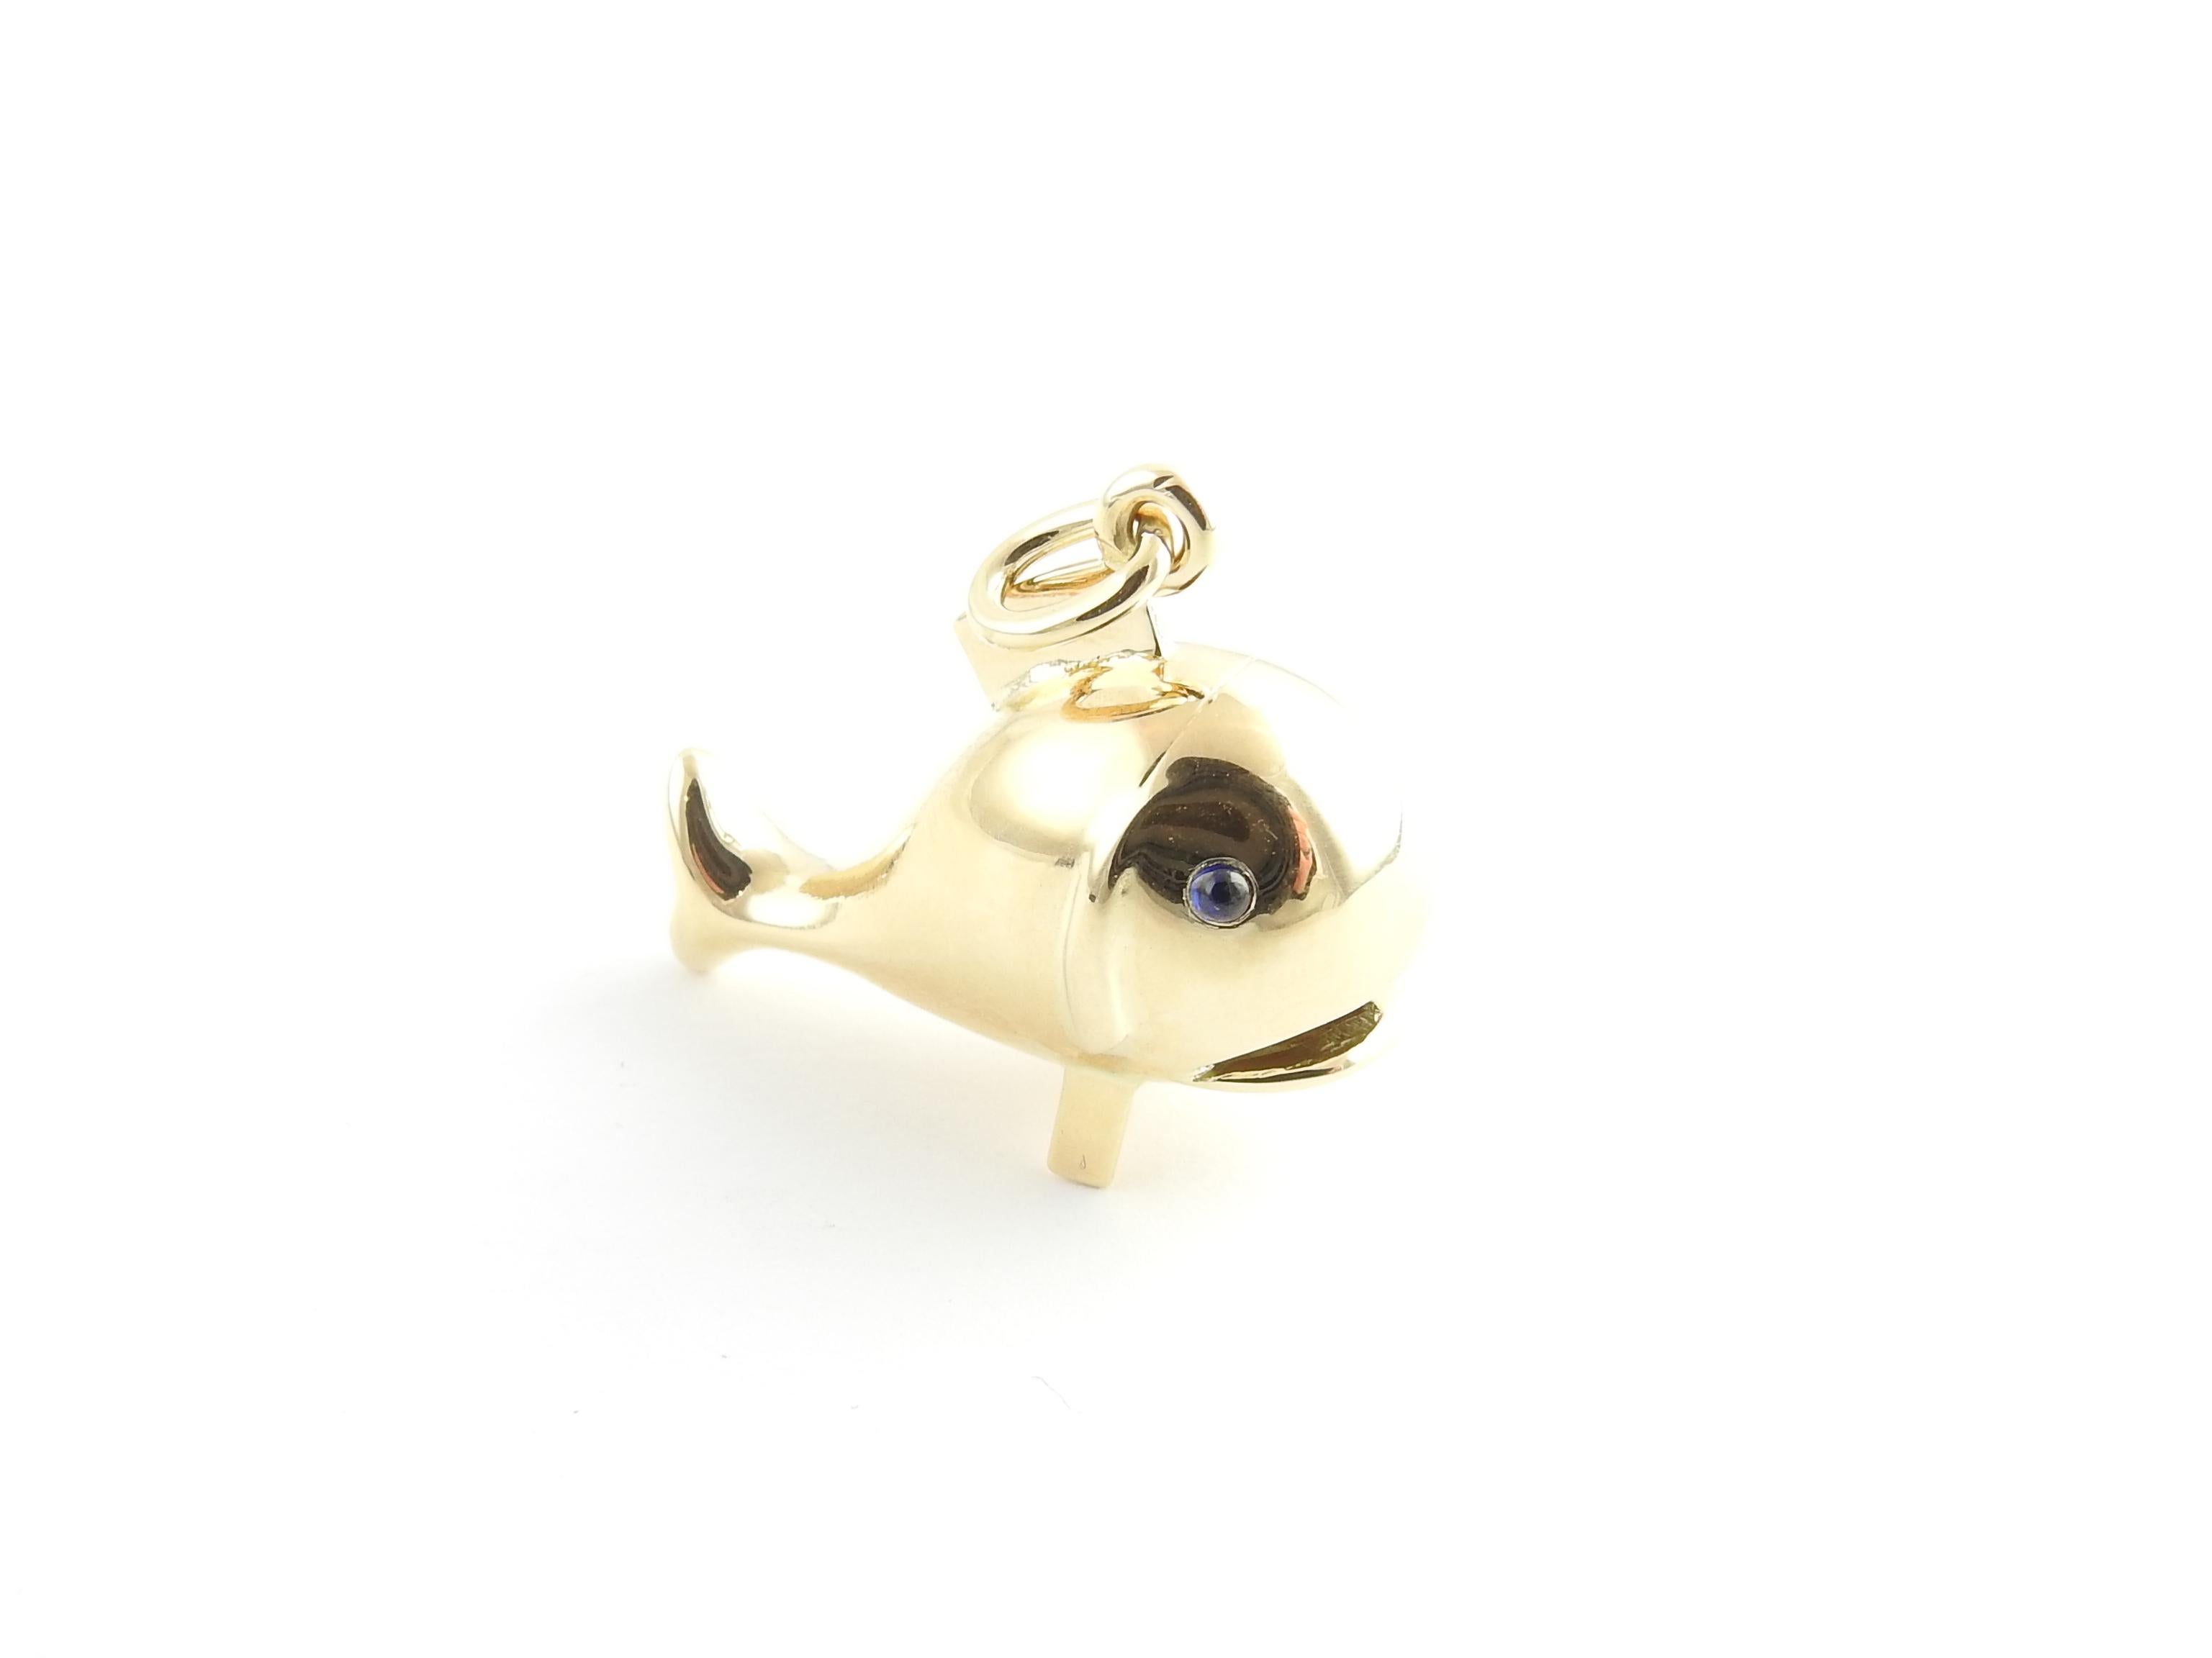 Vintage 14 Karat Yellow Gold Whale Charm

This stunning charm features an adorable whale decorated with two sapphire eyes and crafted in beautifully detailed 14K yellow gold.

Size: 25 mm x 30 mm (actual charm)

Weight: 4.6 dwt. / 7.2 gr.

Stamped: